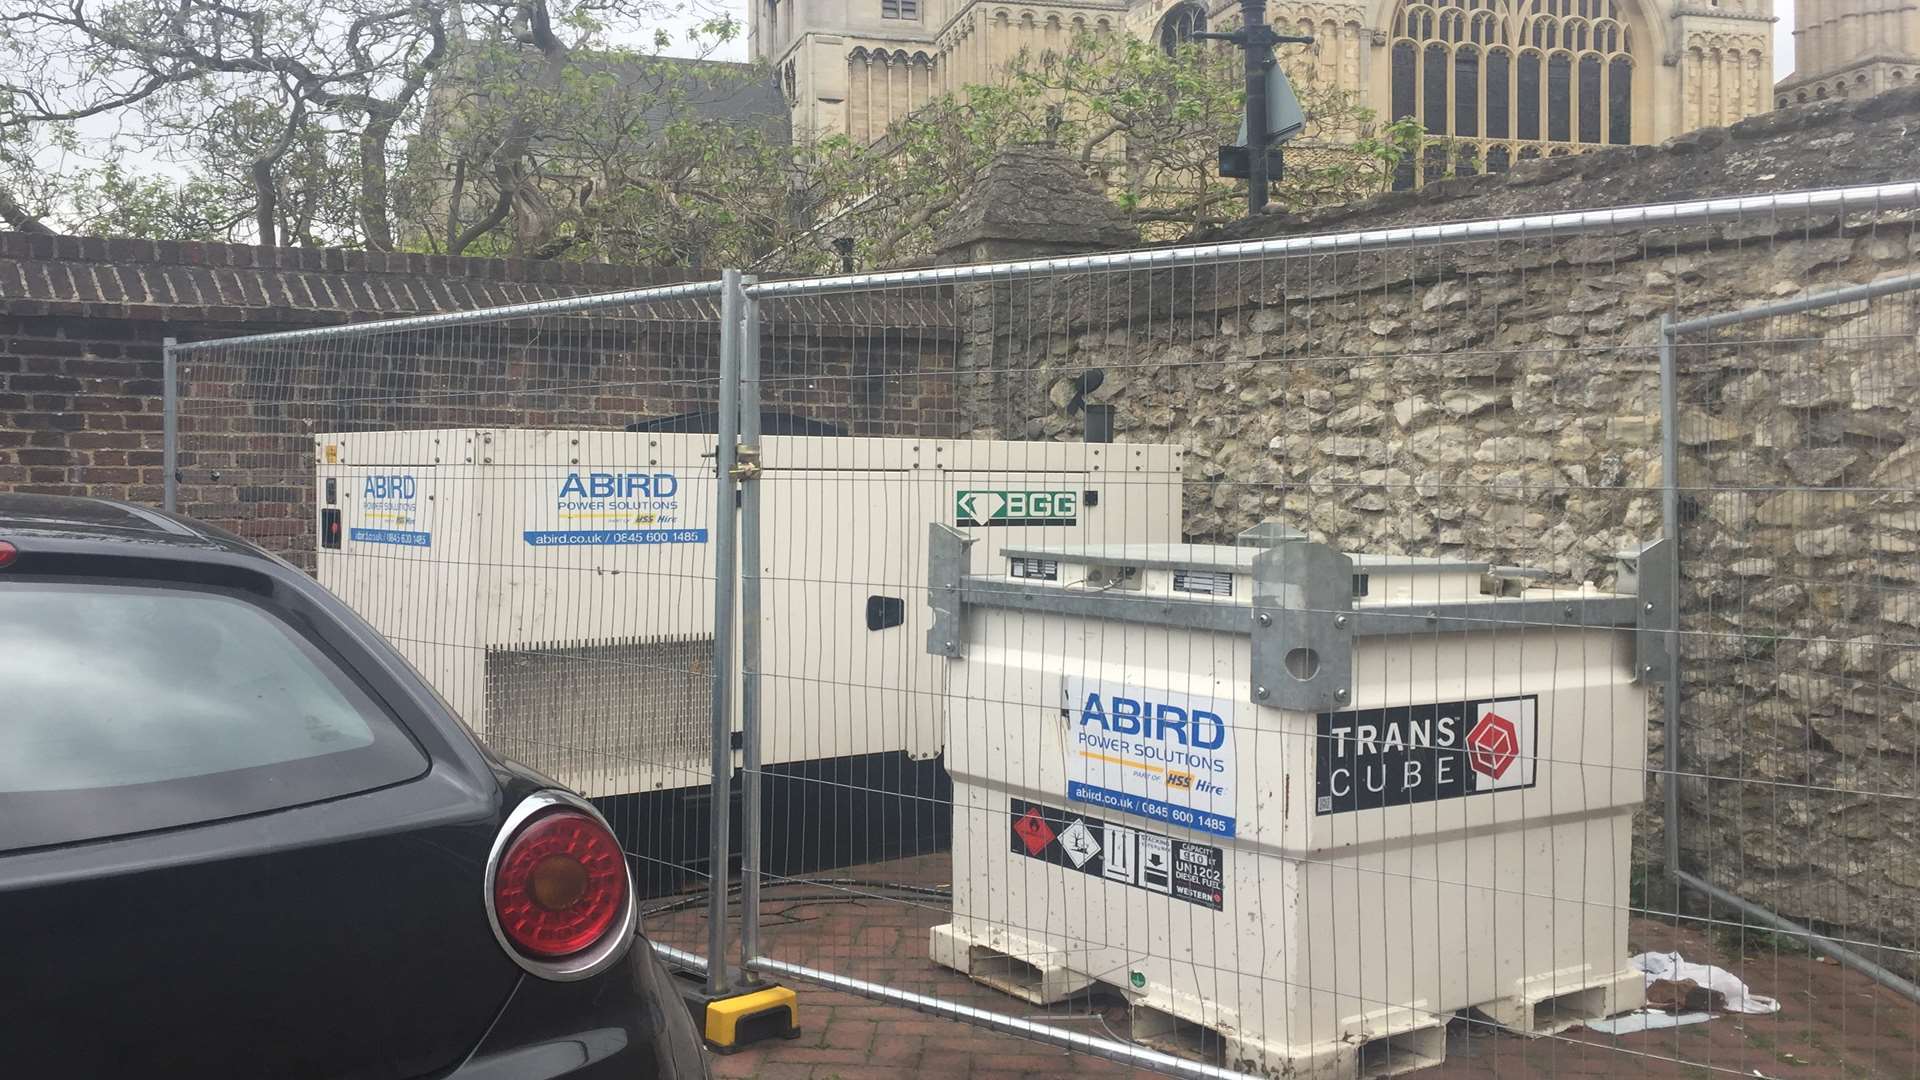 The generator has been in the Rochester car park for months